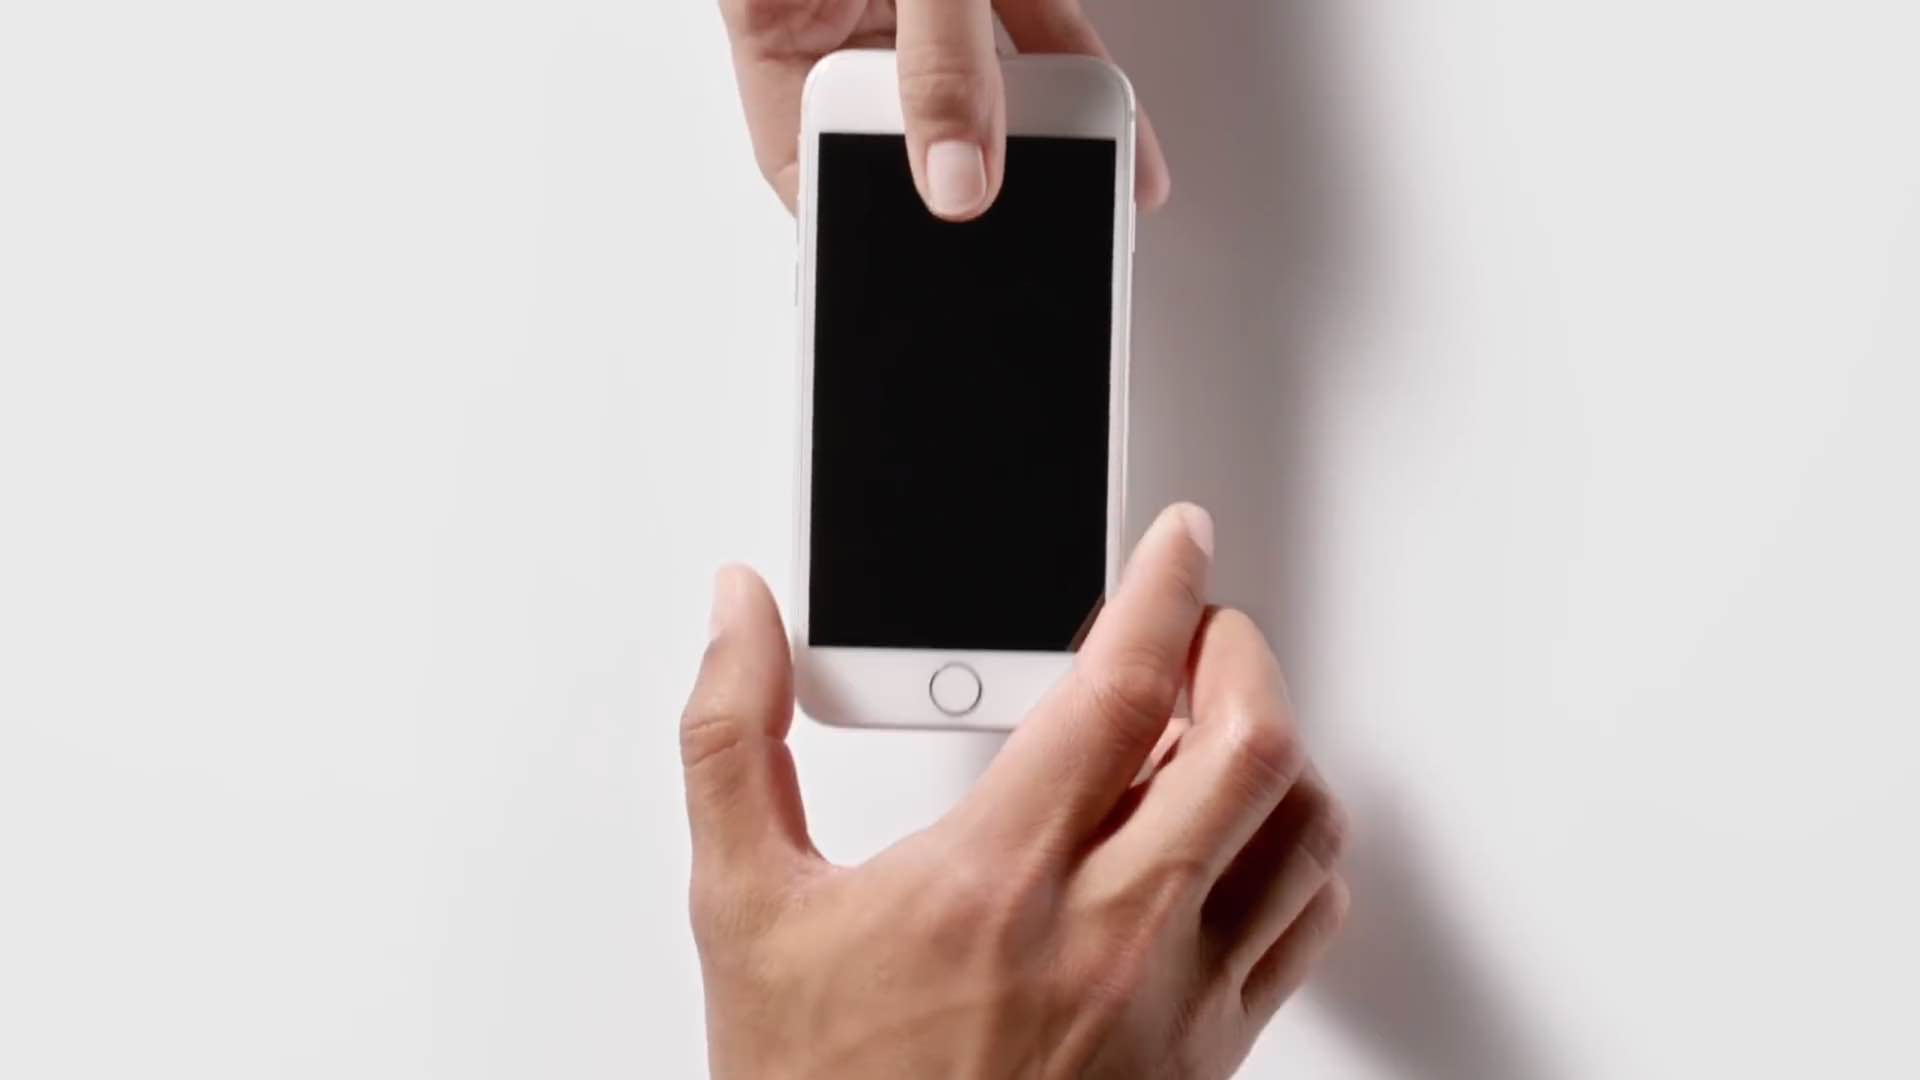 A scene from Apple's ad showing a male hand handing an iPhone 5s over to another male's hand